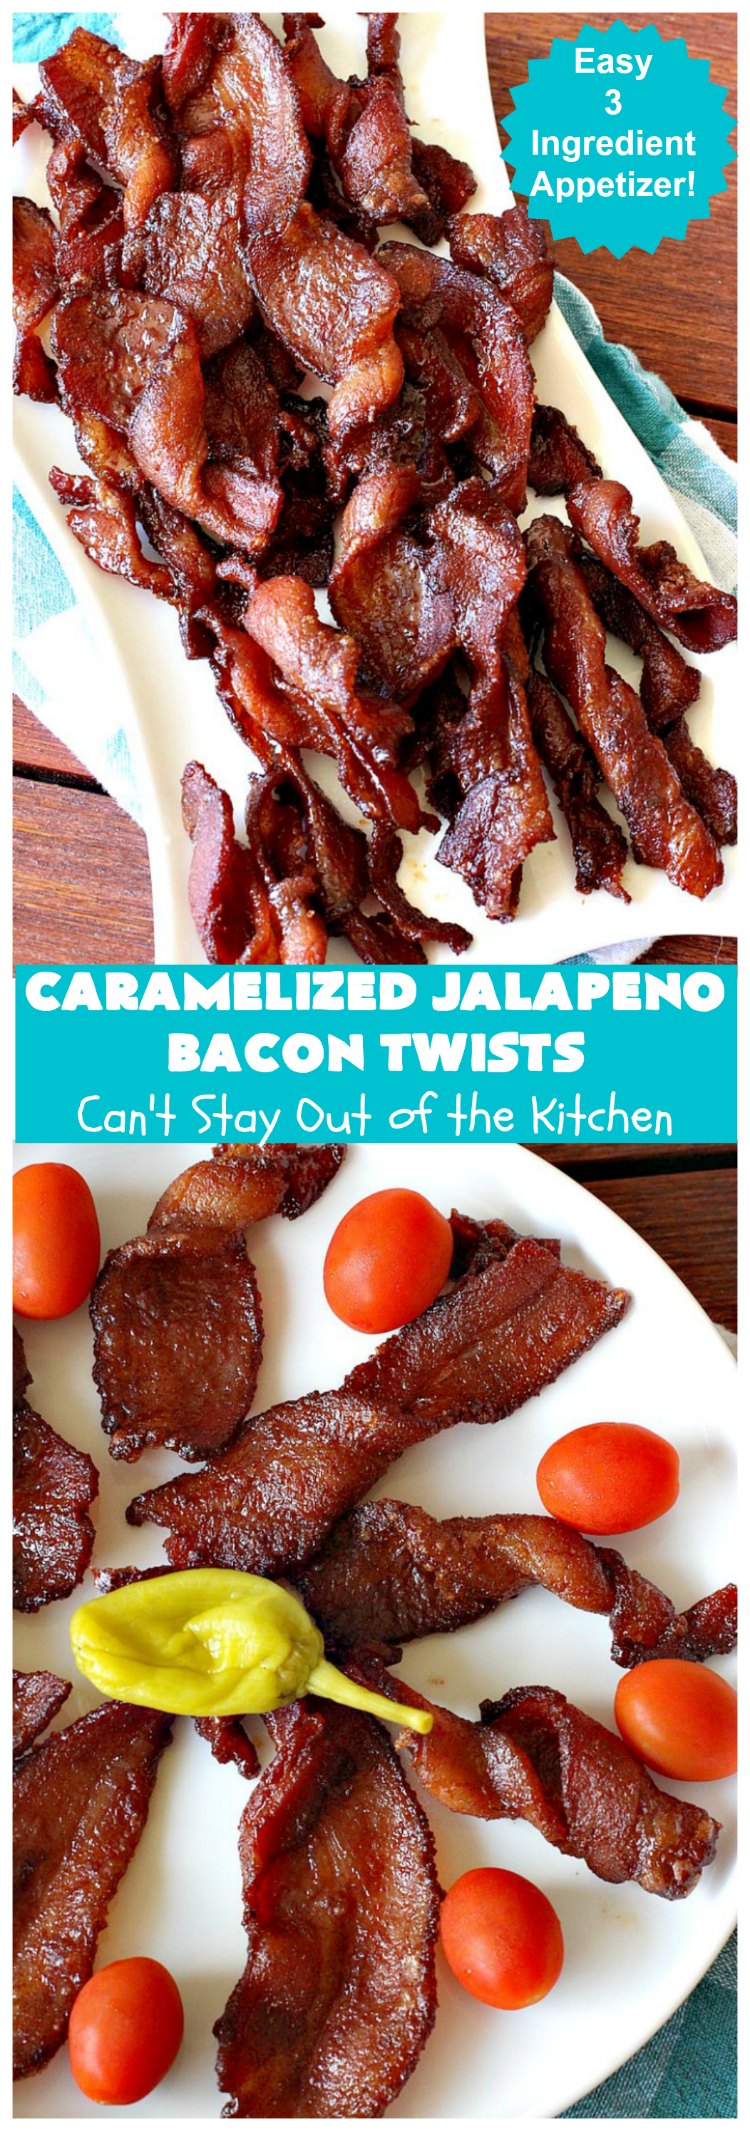 Caramelized Jalapeno Bacon Twists | Can't Stay Out of the Kitchen | this sensational 3 ingredient #appetizer is perfect for any #tailgating or #holiday party. It's quick & easy to make and has enough heat to keep it interesting. #TexMex #jalapenos #bacon #GlutenFree #3IngredientRecipe #HolidayAppetizer #GlutenFreeAppetizer #CaramelizedJalapenoBaconTwists